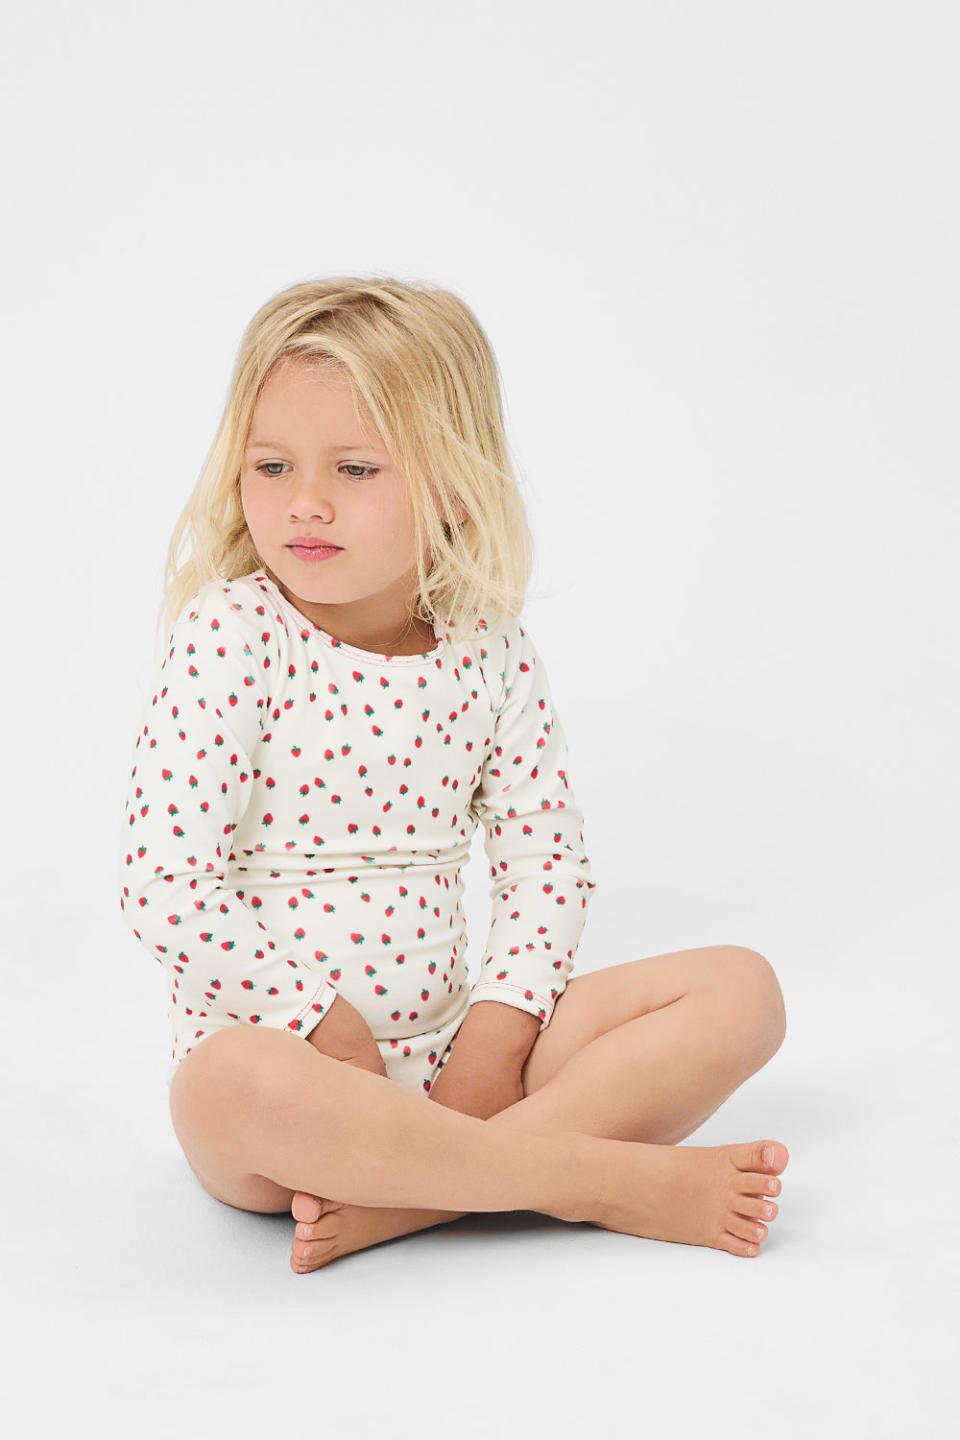 Pieces from Frankies Bikinis childrenswear collection Lil Frankies. - Credit: Courtesy Photo